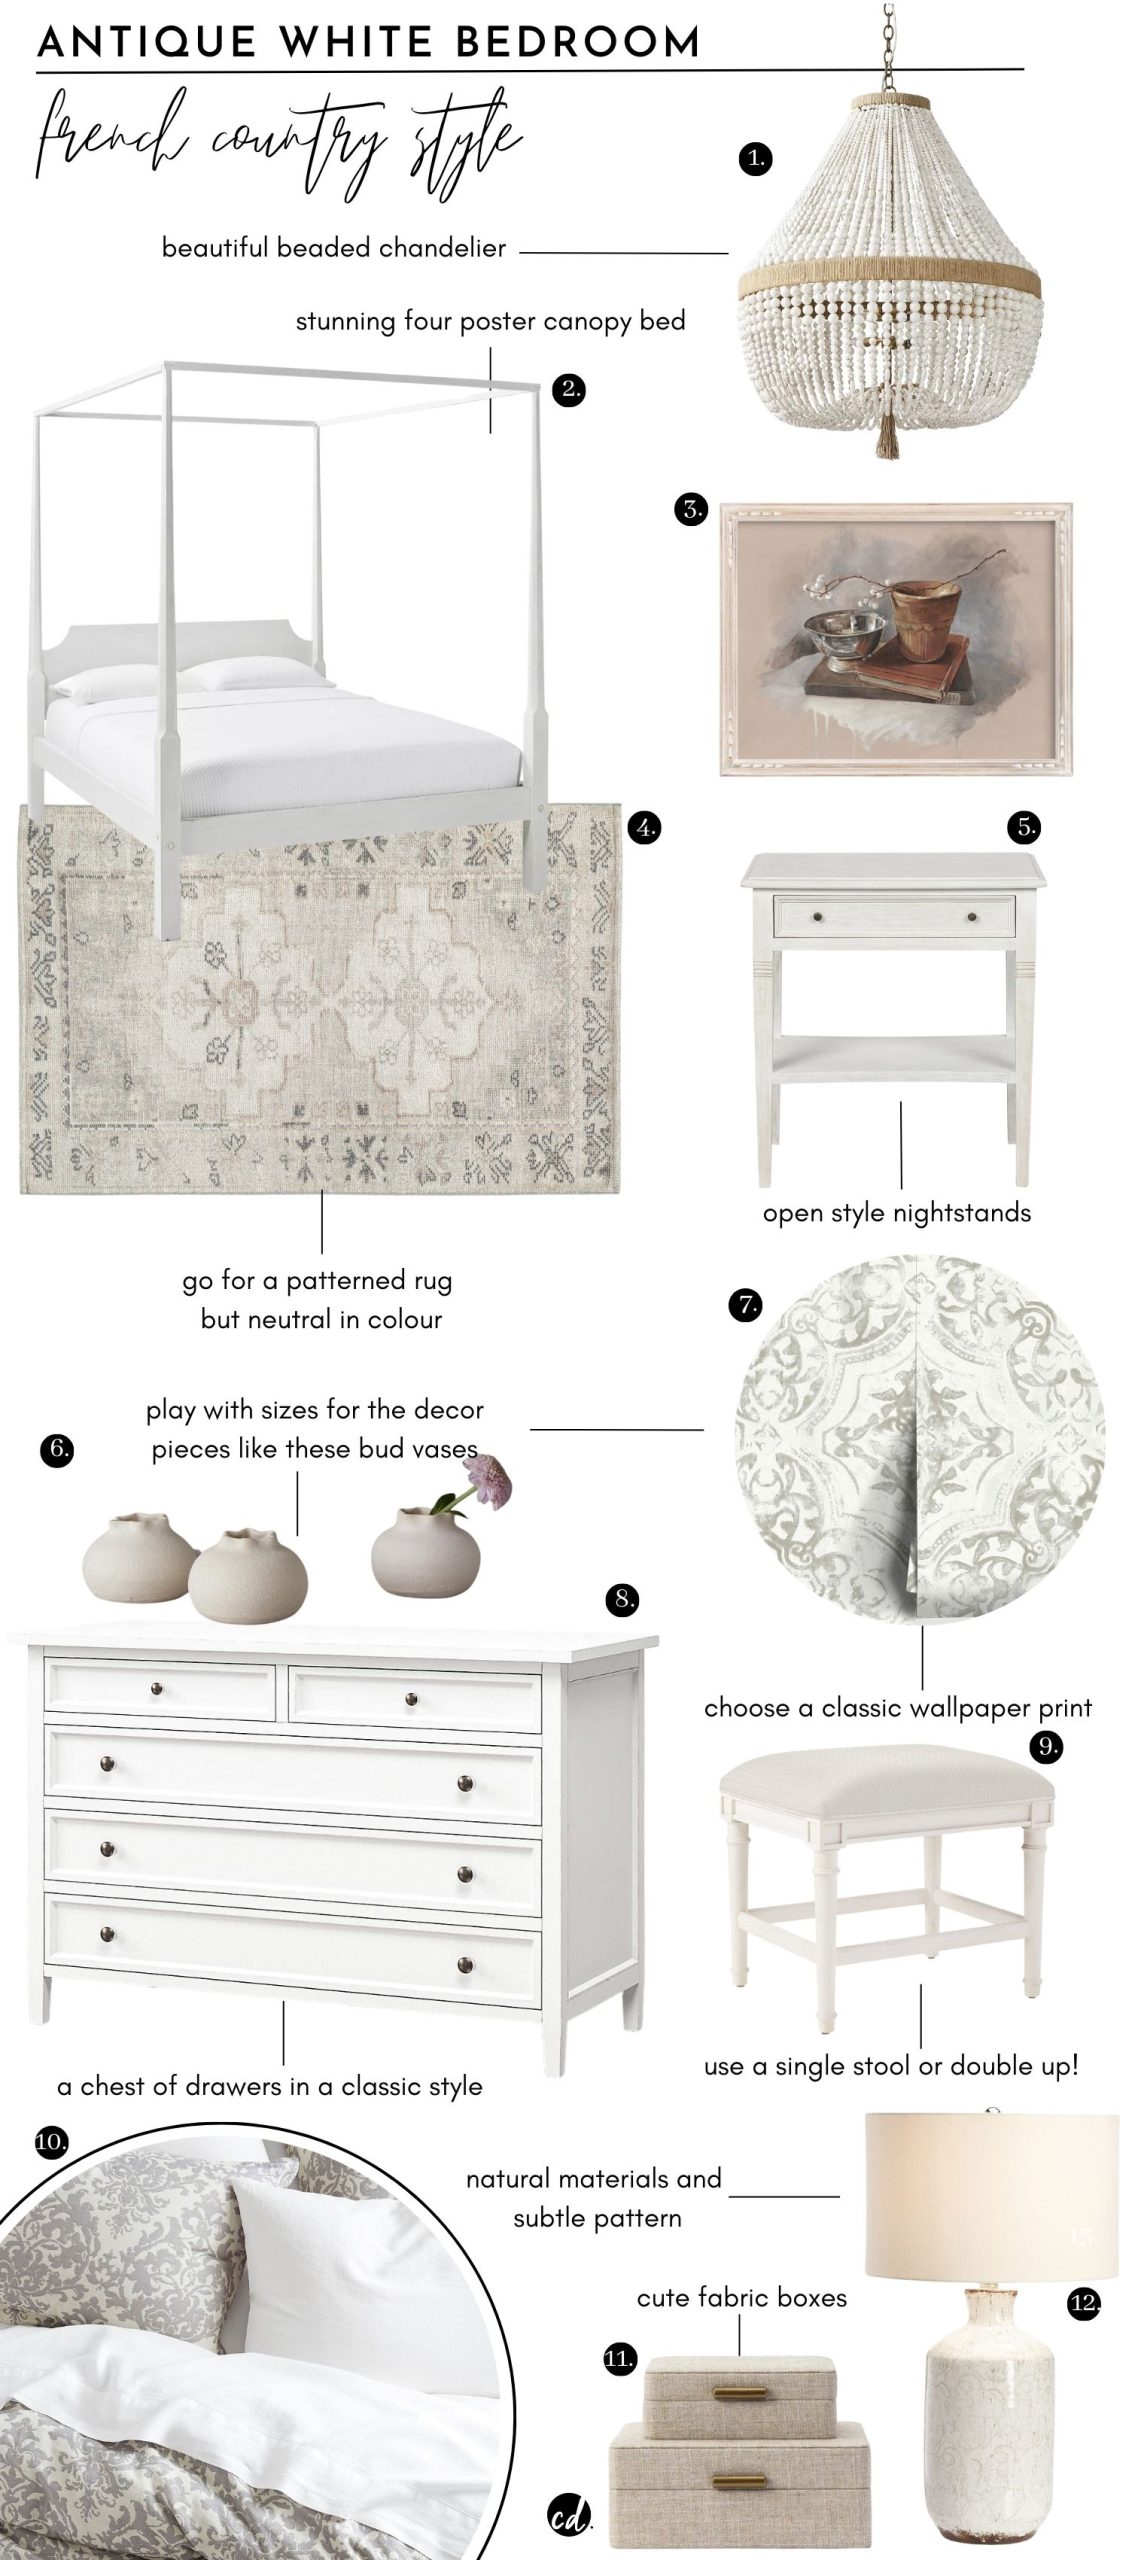 Antique White Bedroom - French Country Style
1 Ventura Chandelier | 2. Whitaker Four Poster Bed | 3. Still Life Art Print | 4. Aurelia Hand Knotted Rug | 5. Luna One Drawer Nightstand | 6. Mel Vases (Set of 3) | 7. Turia Wallpaper | 8. Harbor White Dresser | 9. Bridgeway Stool | 10. Jacquard Medallion Bedding | 11. Natural Fabric Boxes | 12. Bethany Ceramic Table Lamp